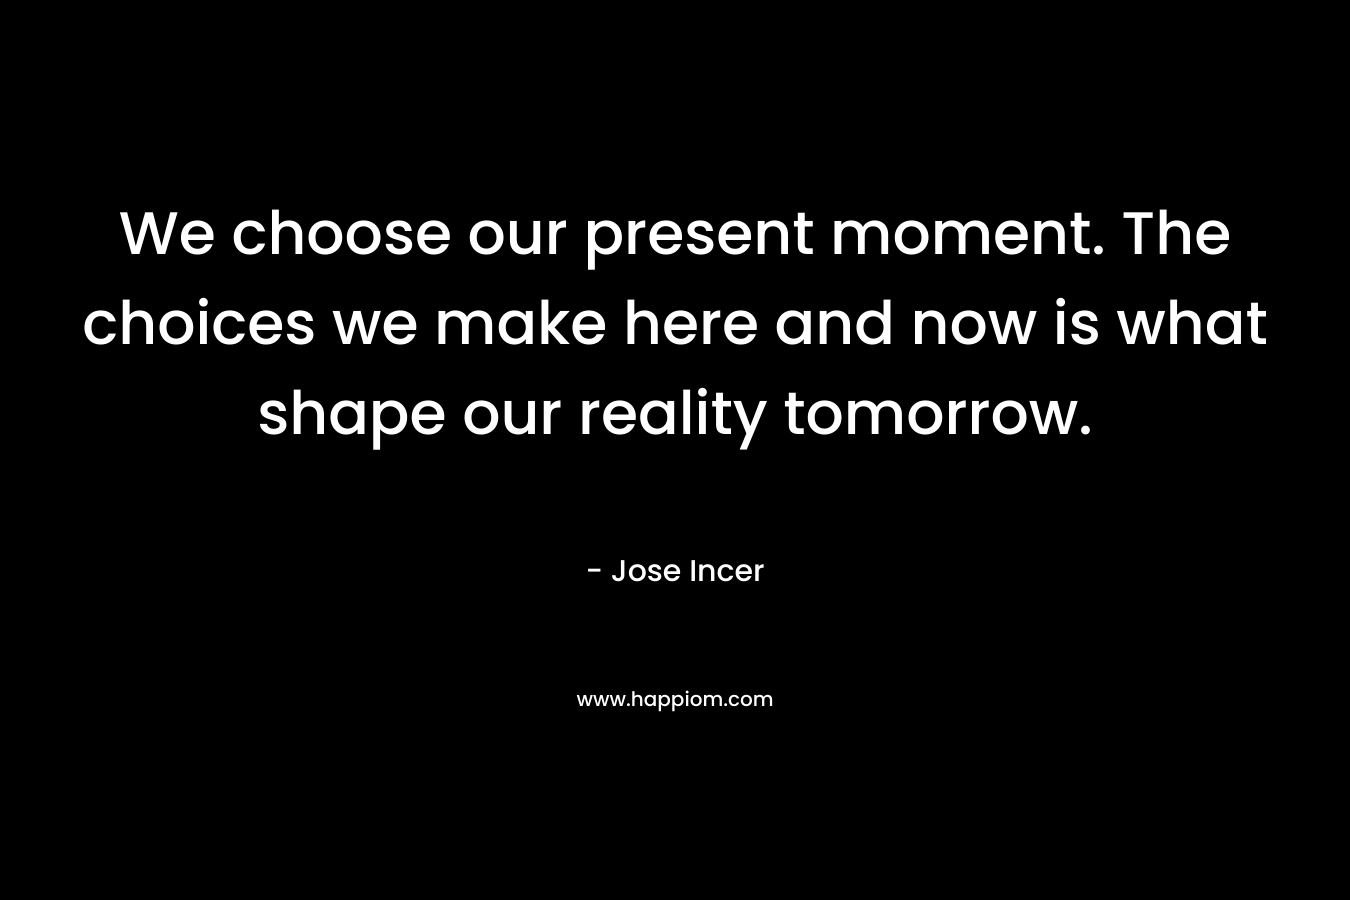 We choose our present moment. The choices we make here and now is what shape our reality tomorrow. – Jose Incer